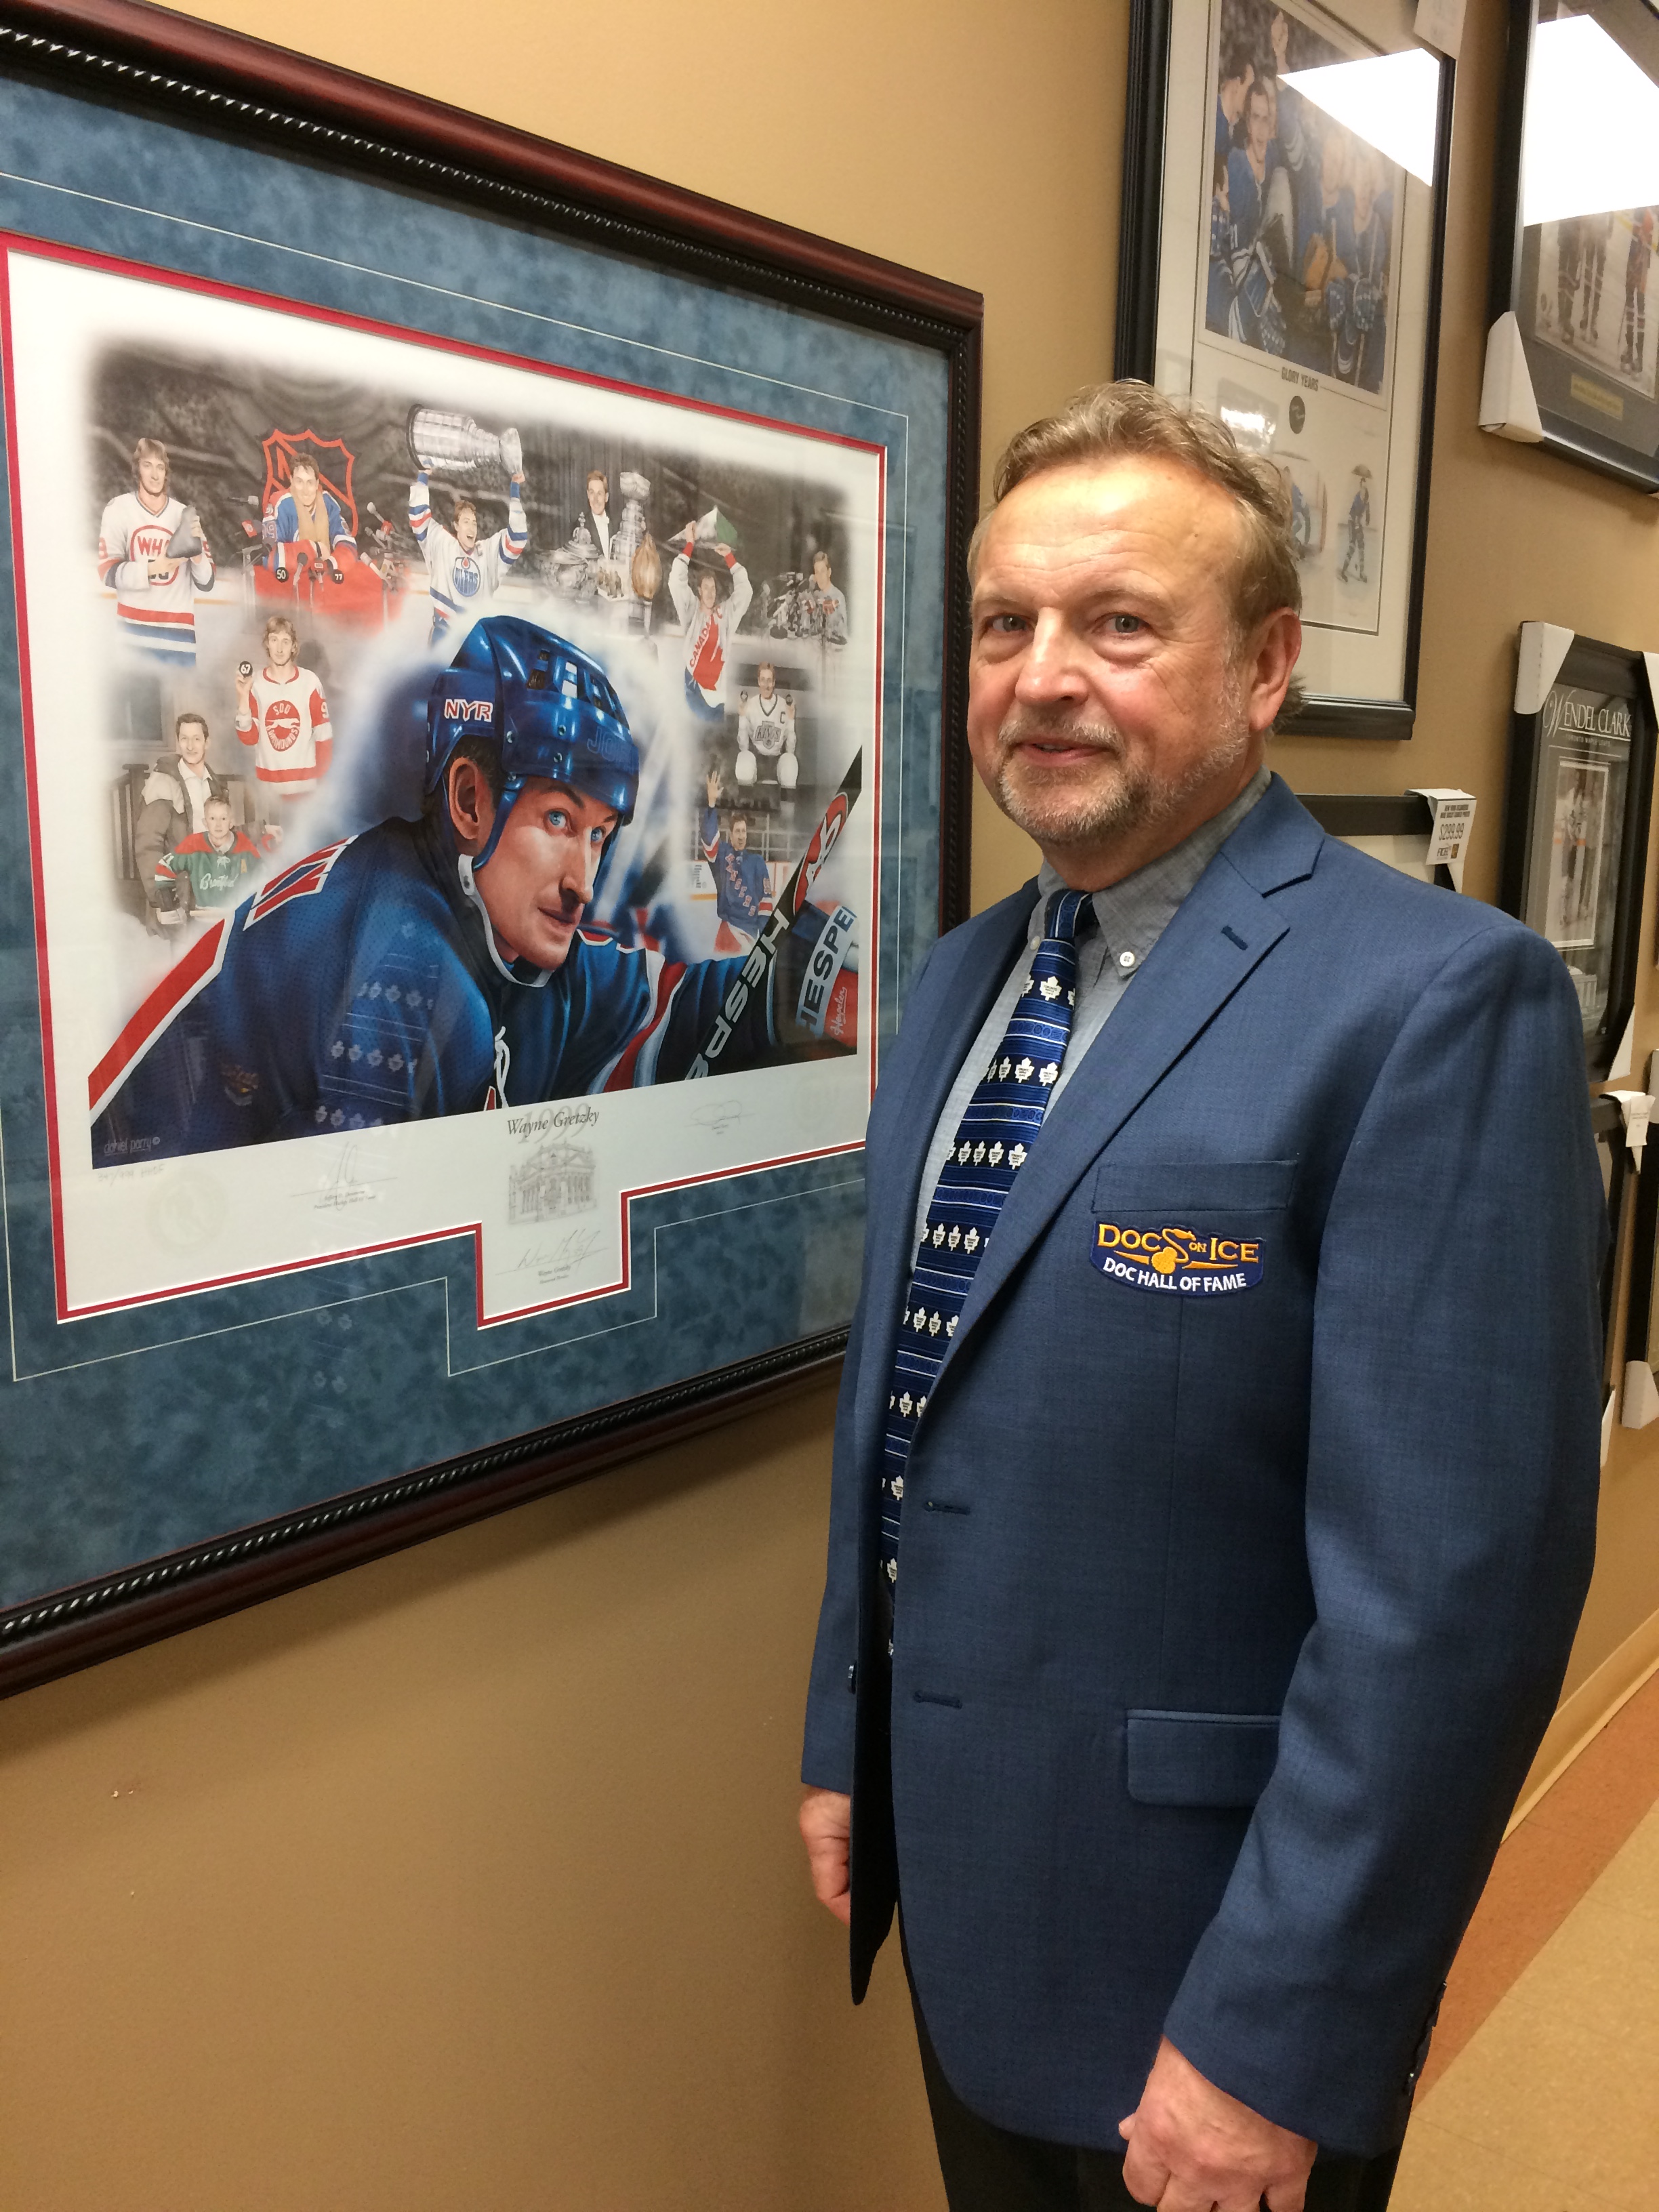 Dr. Peter W. Kujtan, 4 April 2017 at Docs on Ice Hall of Fame Google image Thumb_pete-1715-crop_2 from http://www.kujtan.ca/news